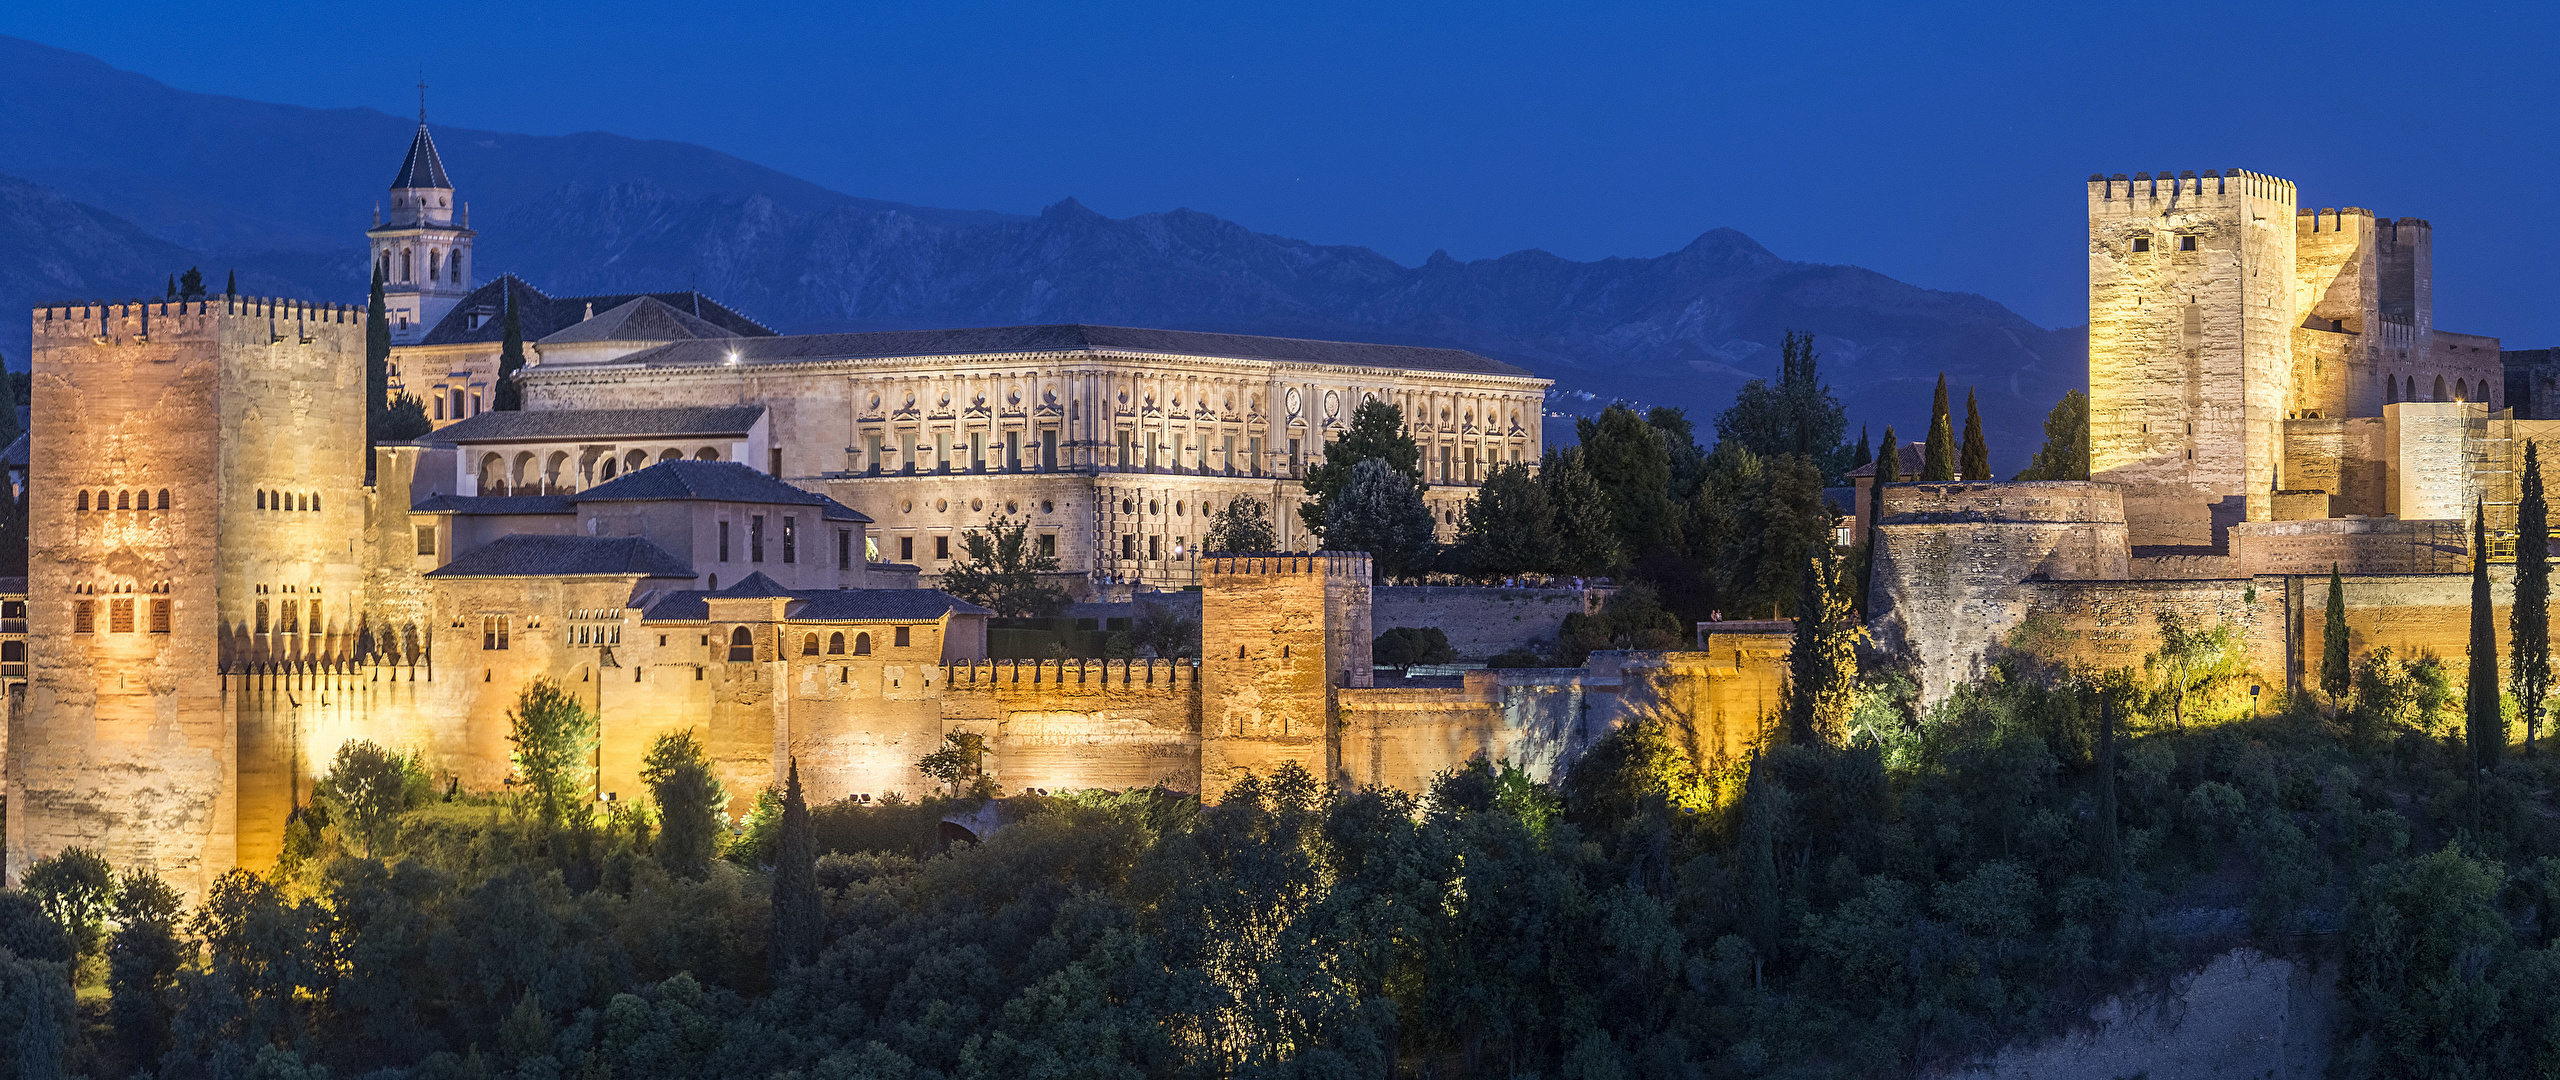 The Alhambra, alhambra wallpapers, christopher tremblay, 2560x1080 Dual Screen Desktop